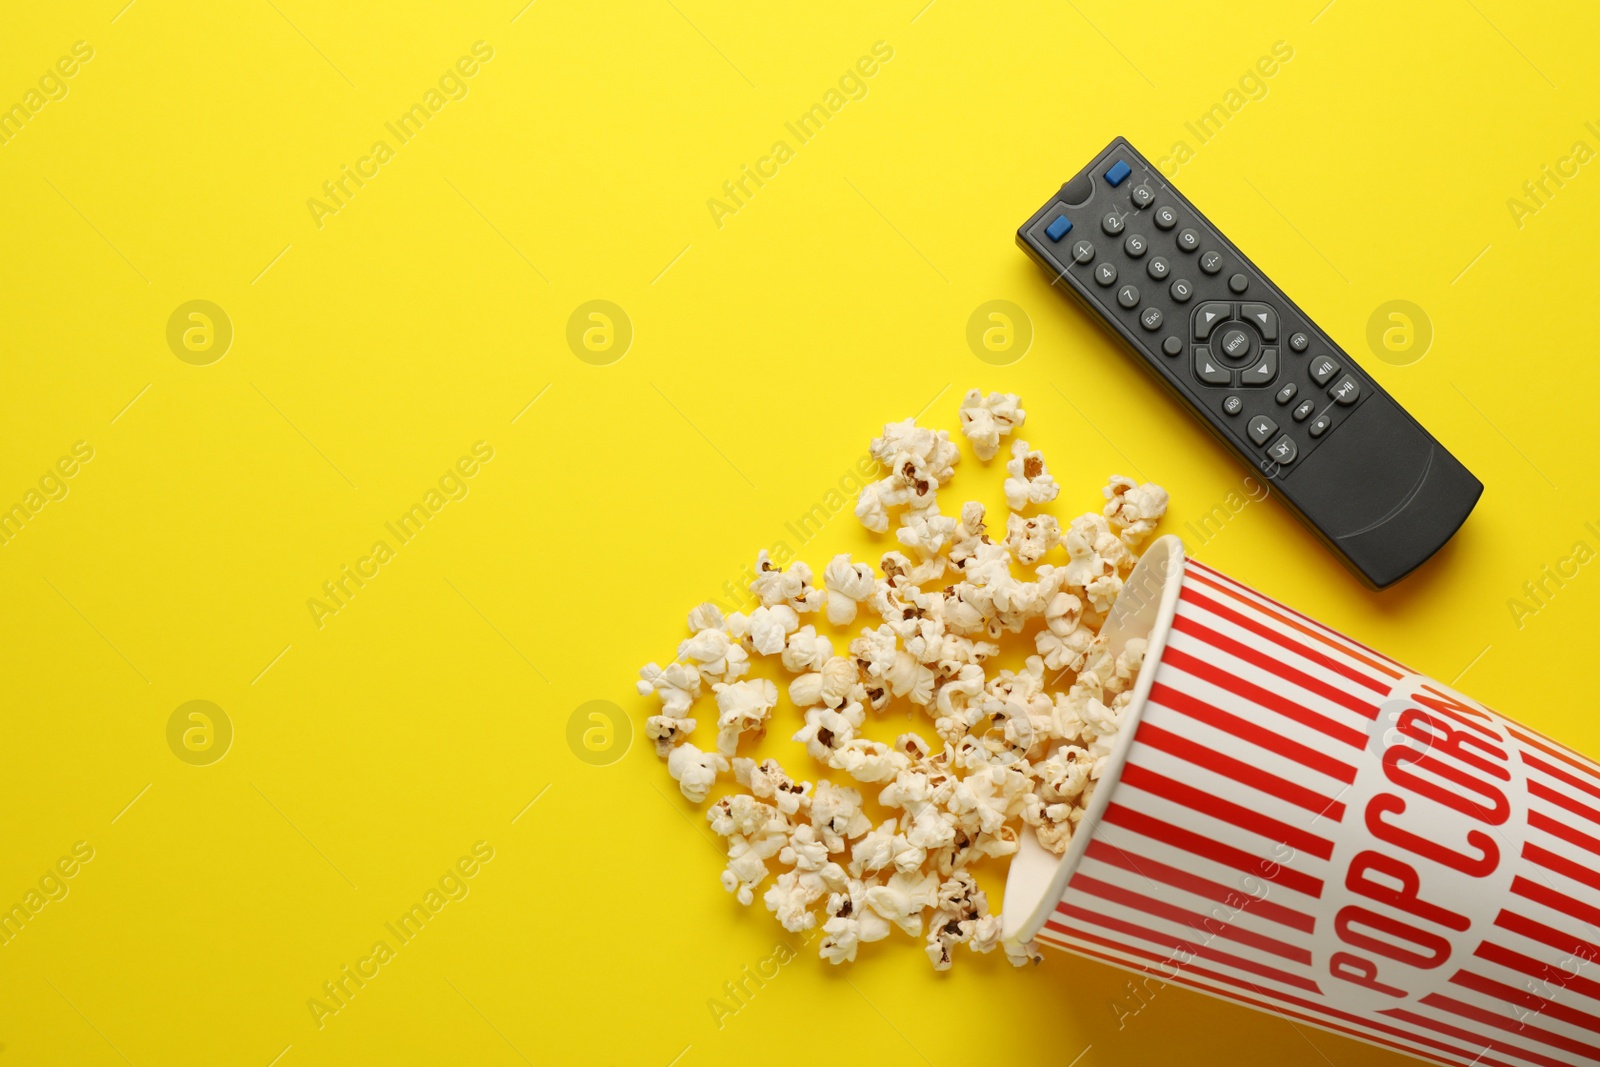 Photo of Remote control and cup of popcorn on yellow background, flat lay. Space for text